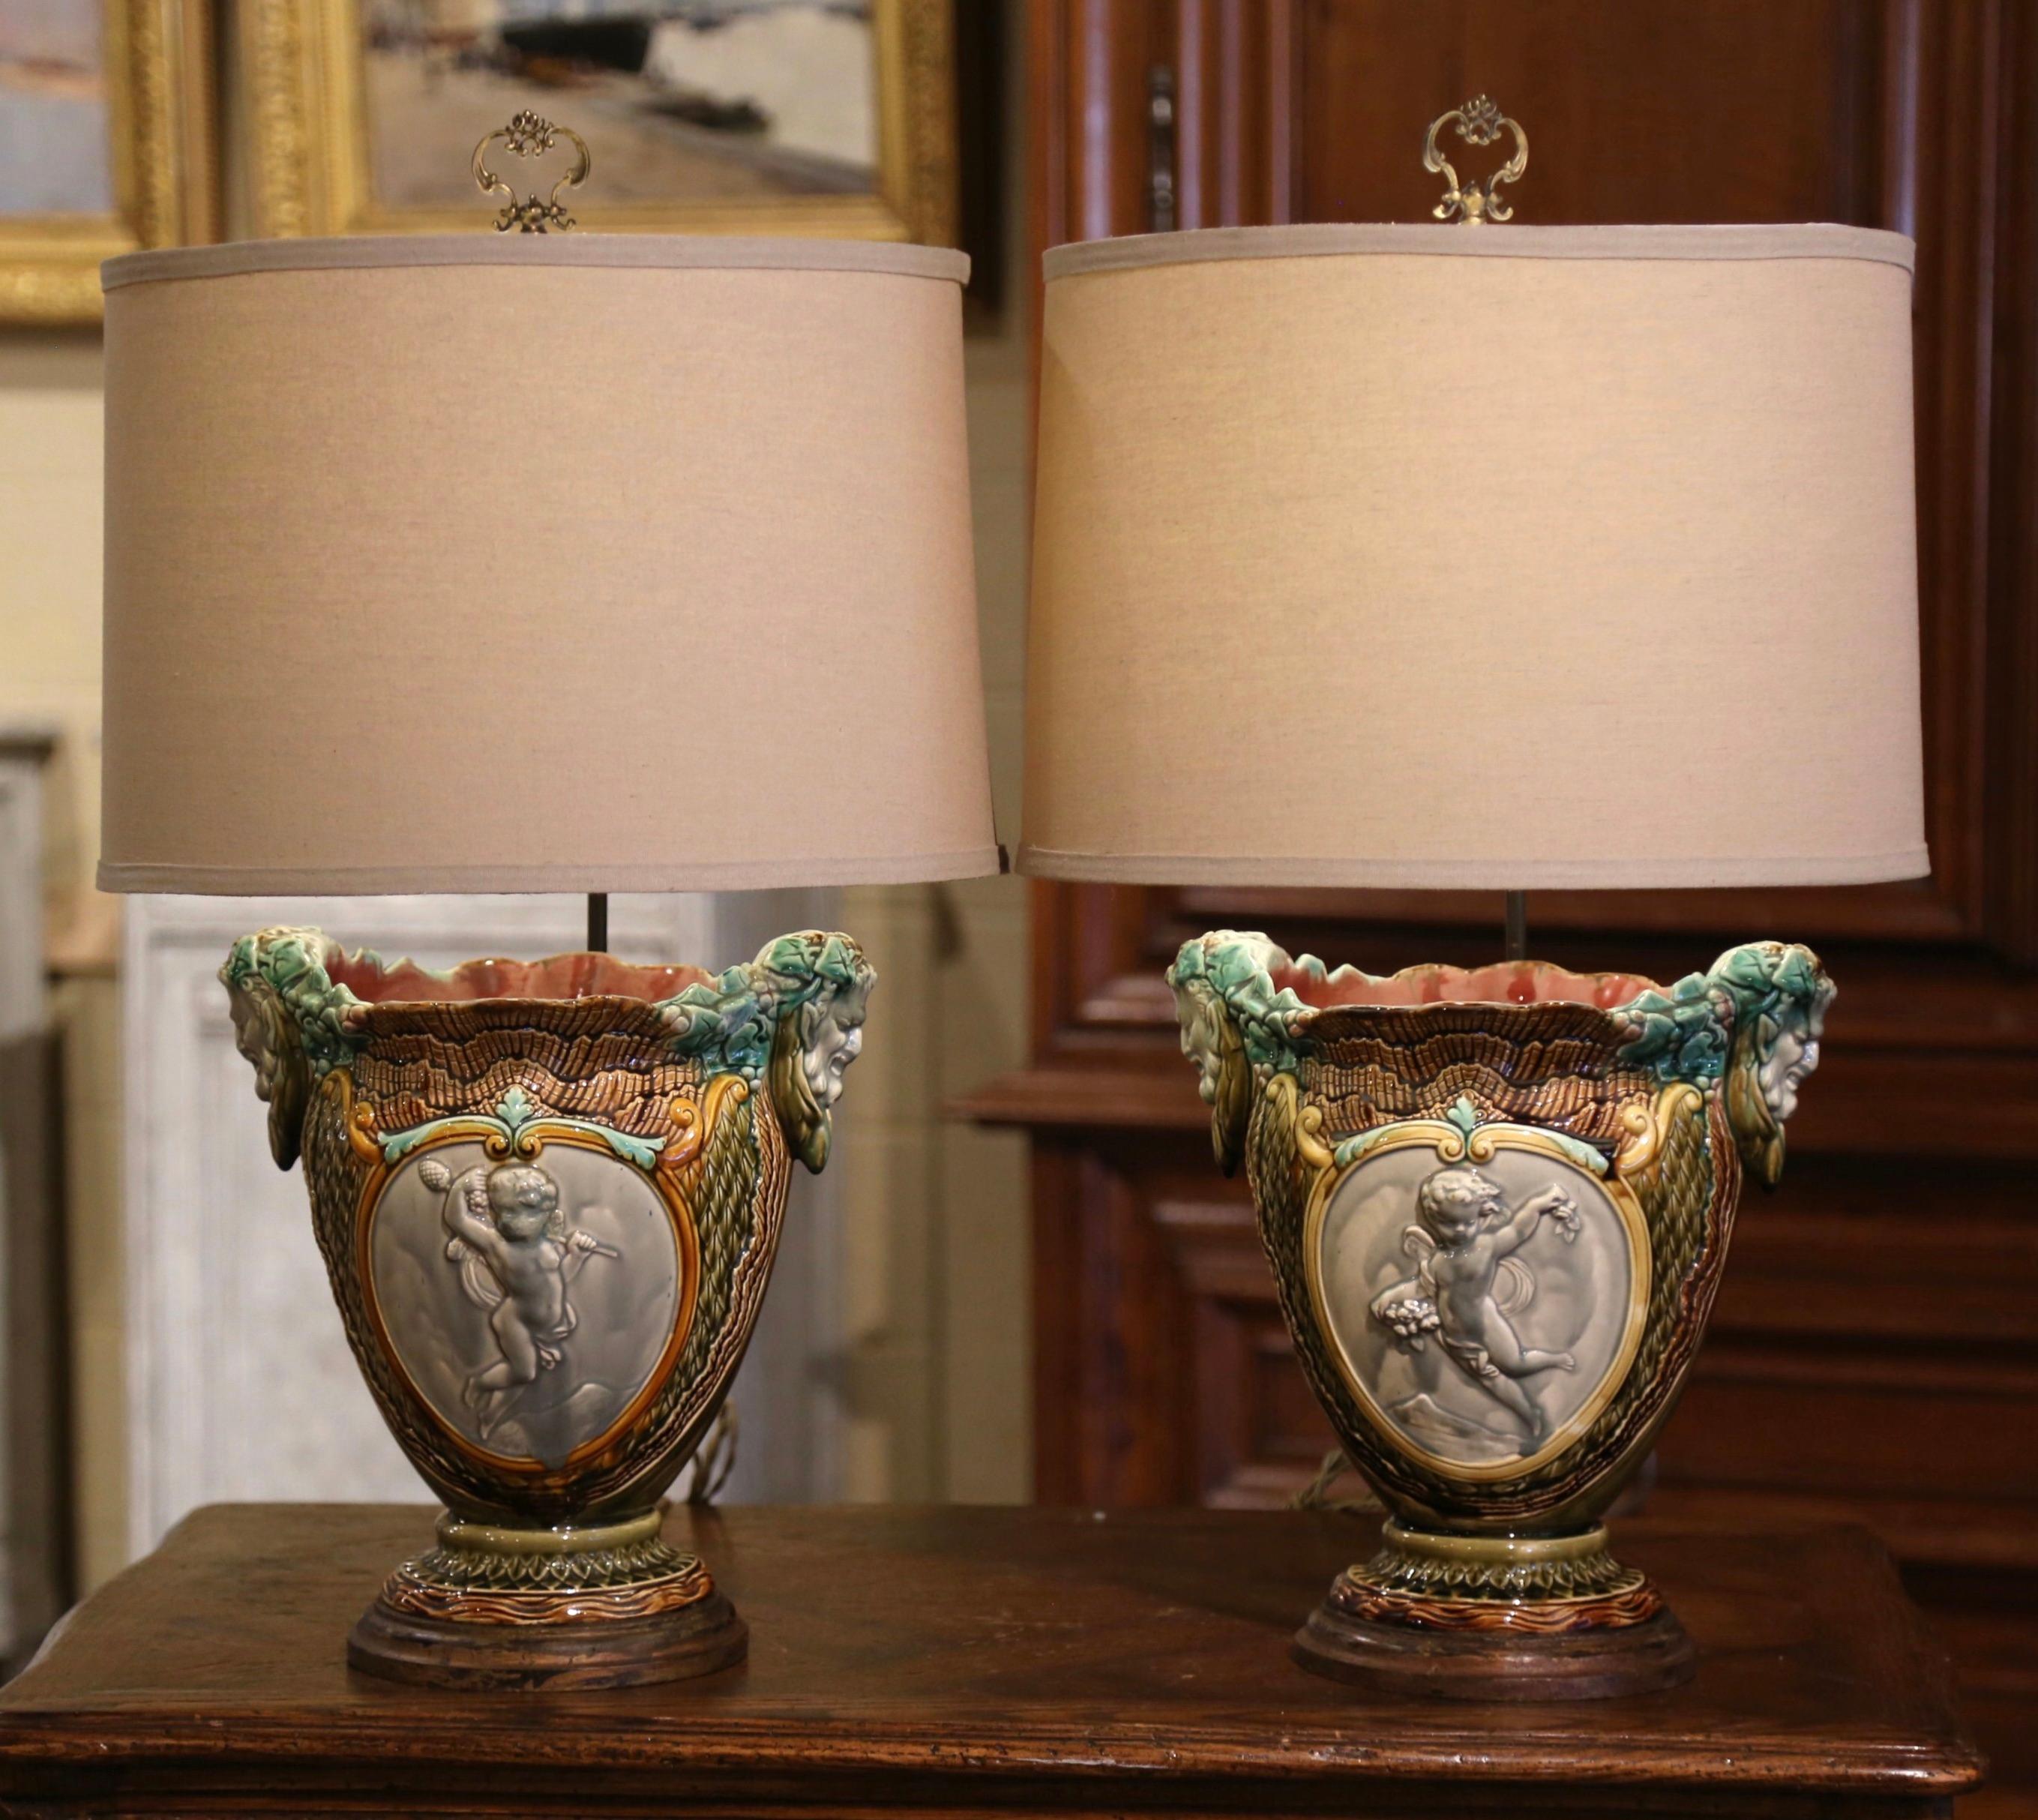 Ceramic Pair of 19th Century French Barbotine Faience Cache Pots Converted into Lamps